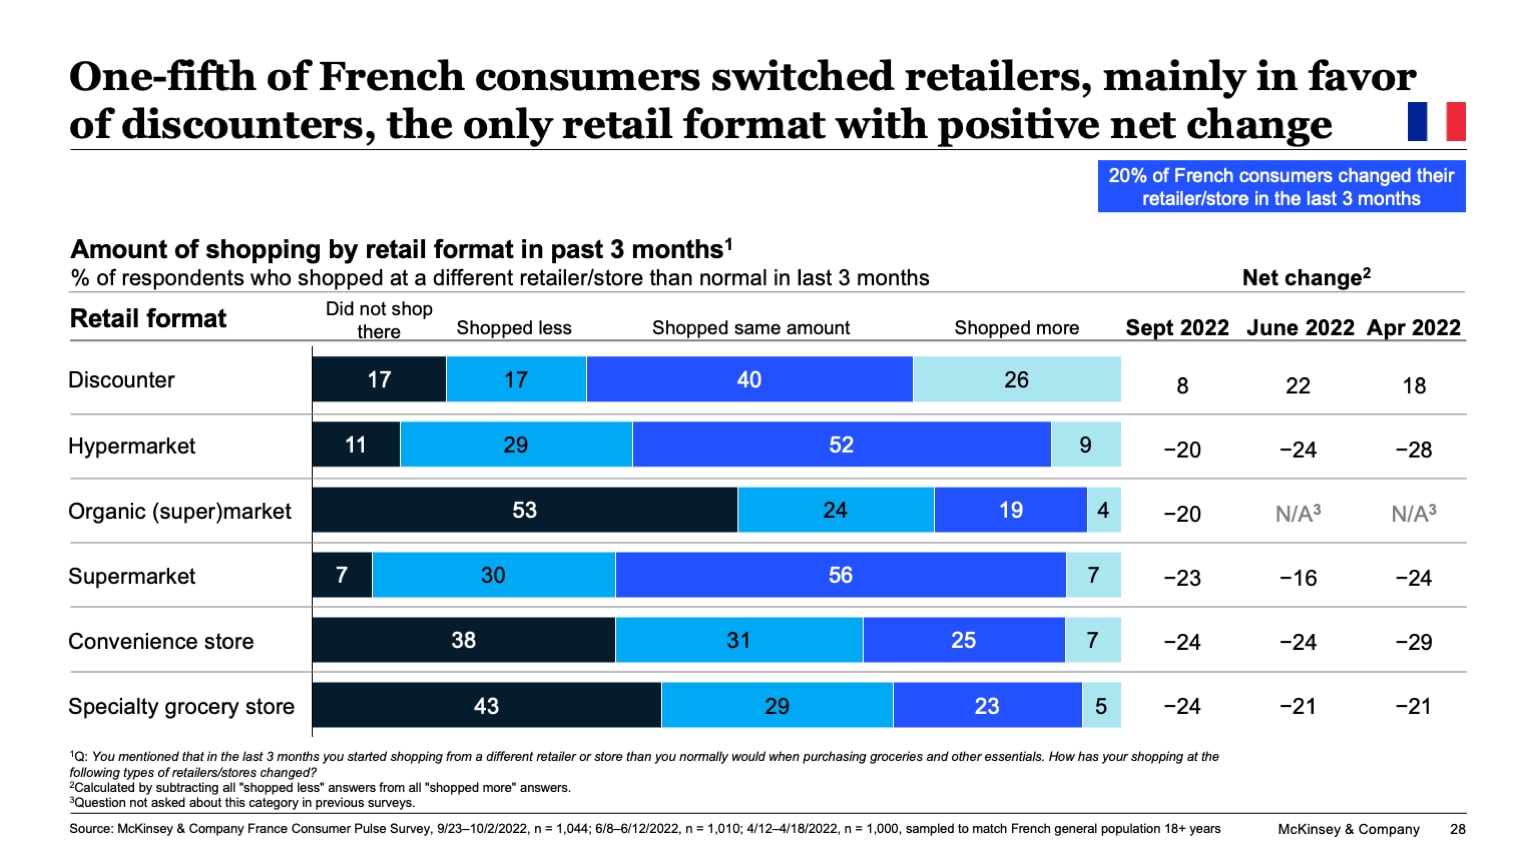 One-fifth of French consumers switched retailers, mainly in favor of discounters, the only retail format with positive net change